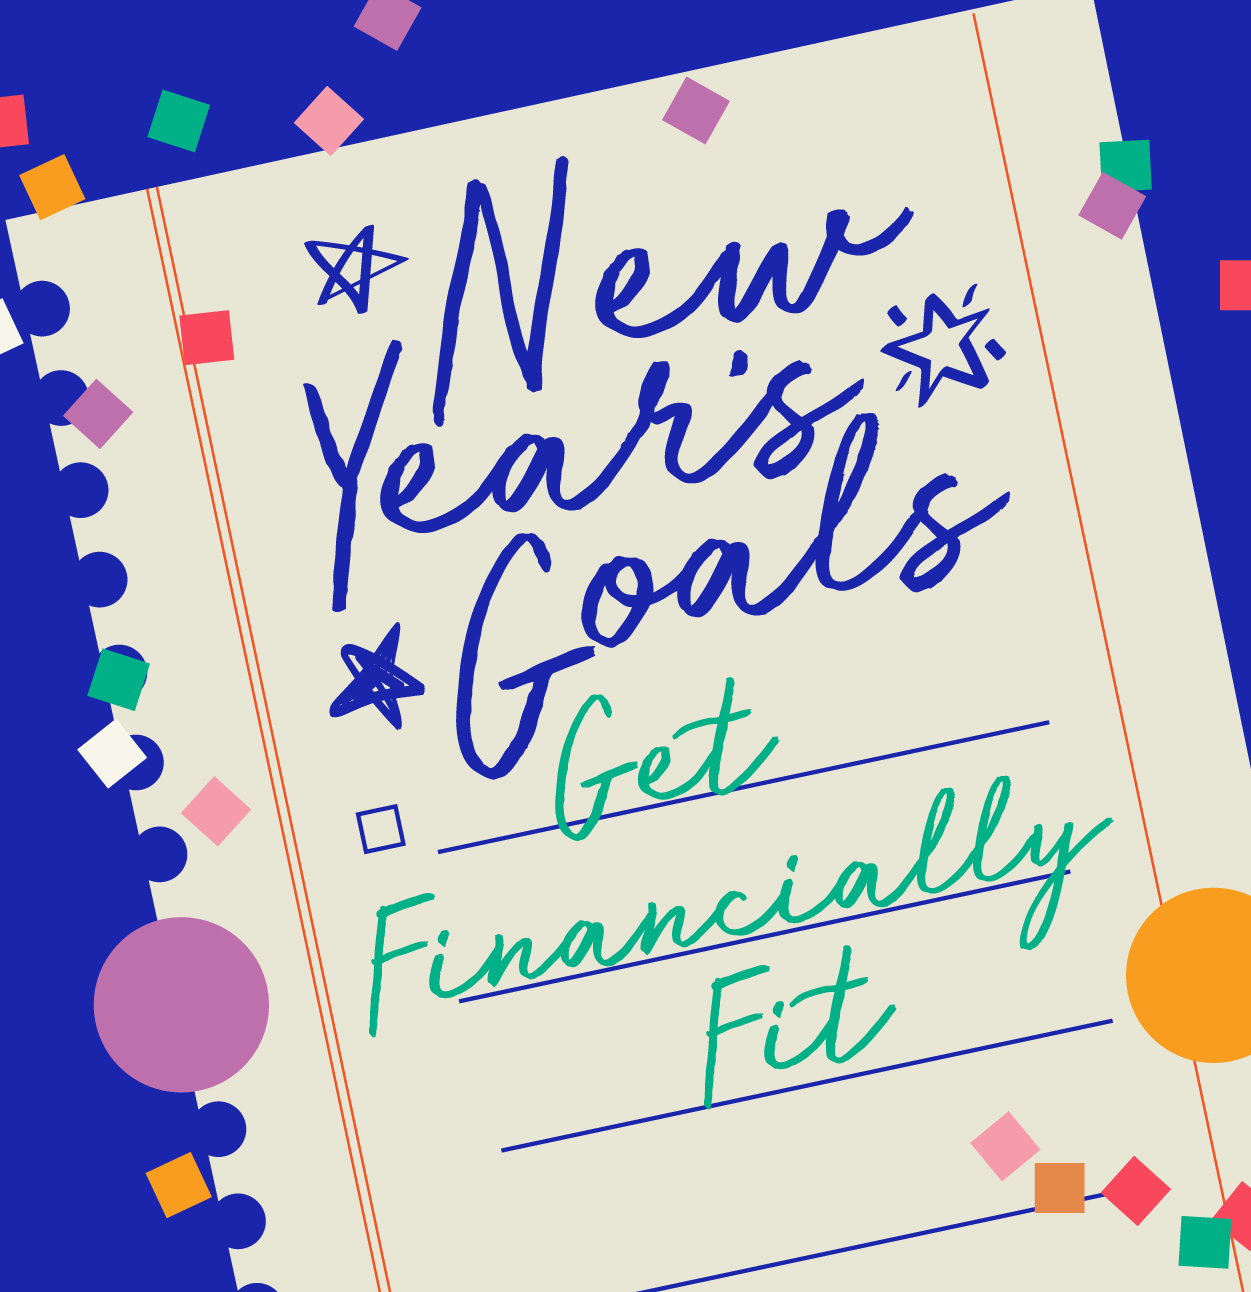 New Year's Goals Get Financially Fit